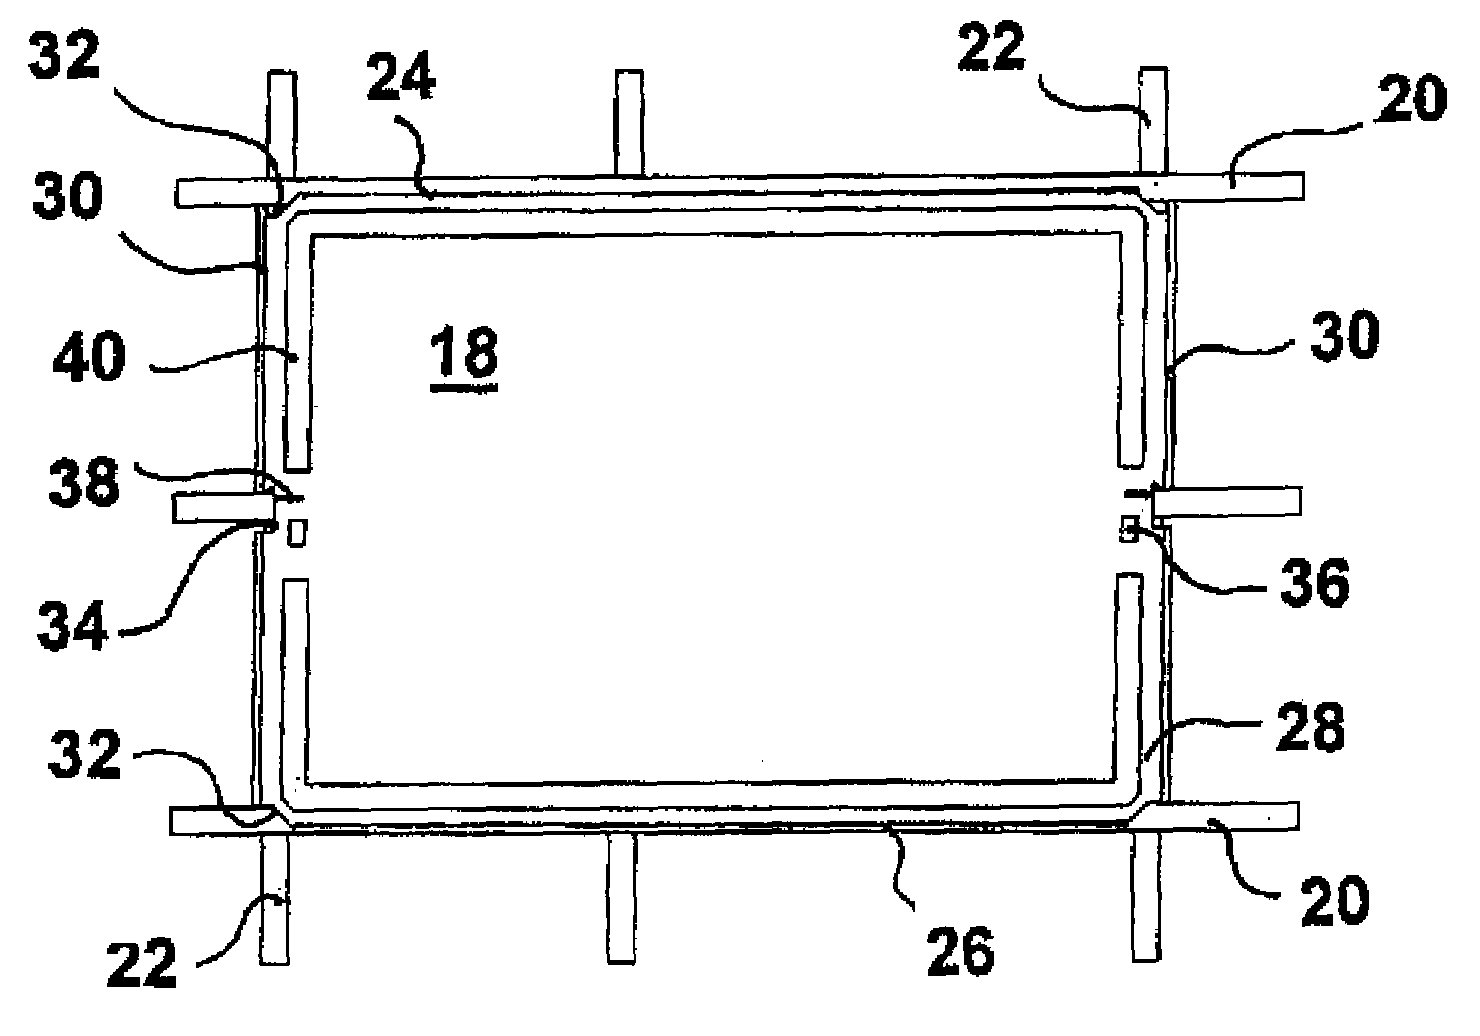 Identification plate for pallet container, and method of attaching an identification plate to a pallet container